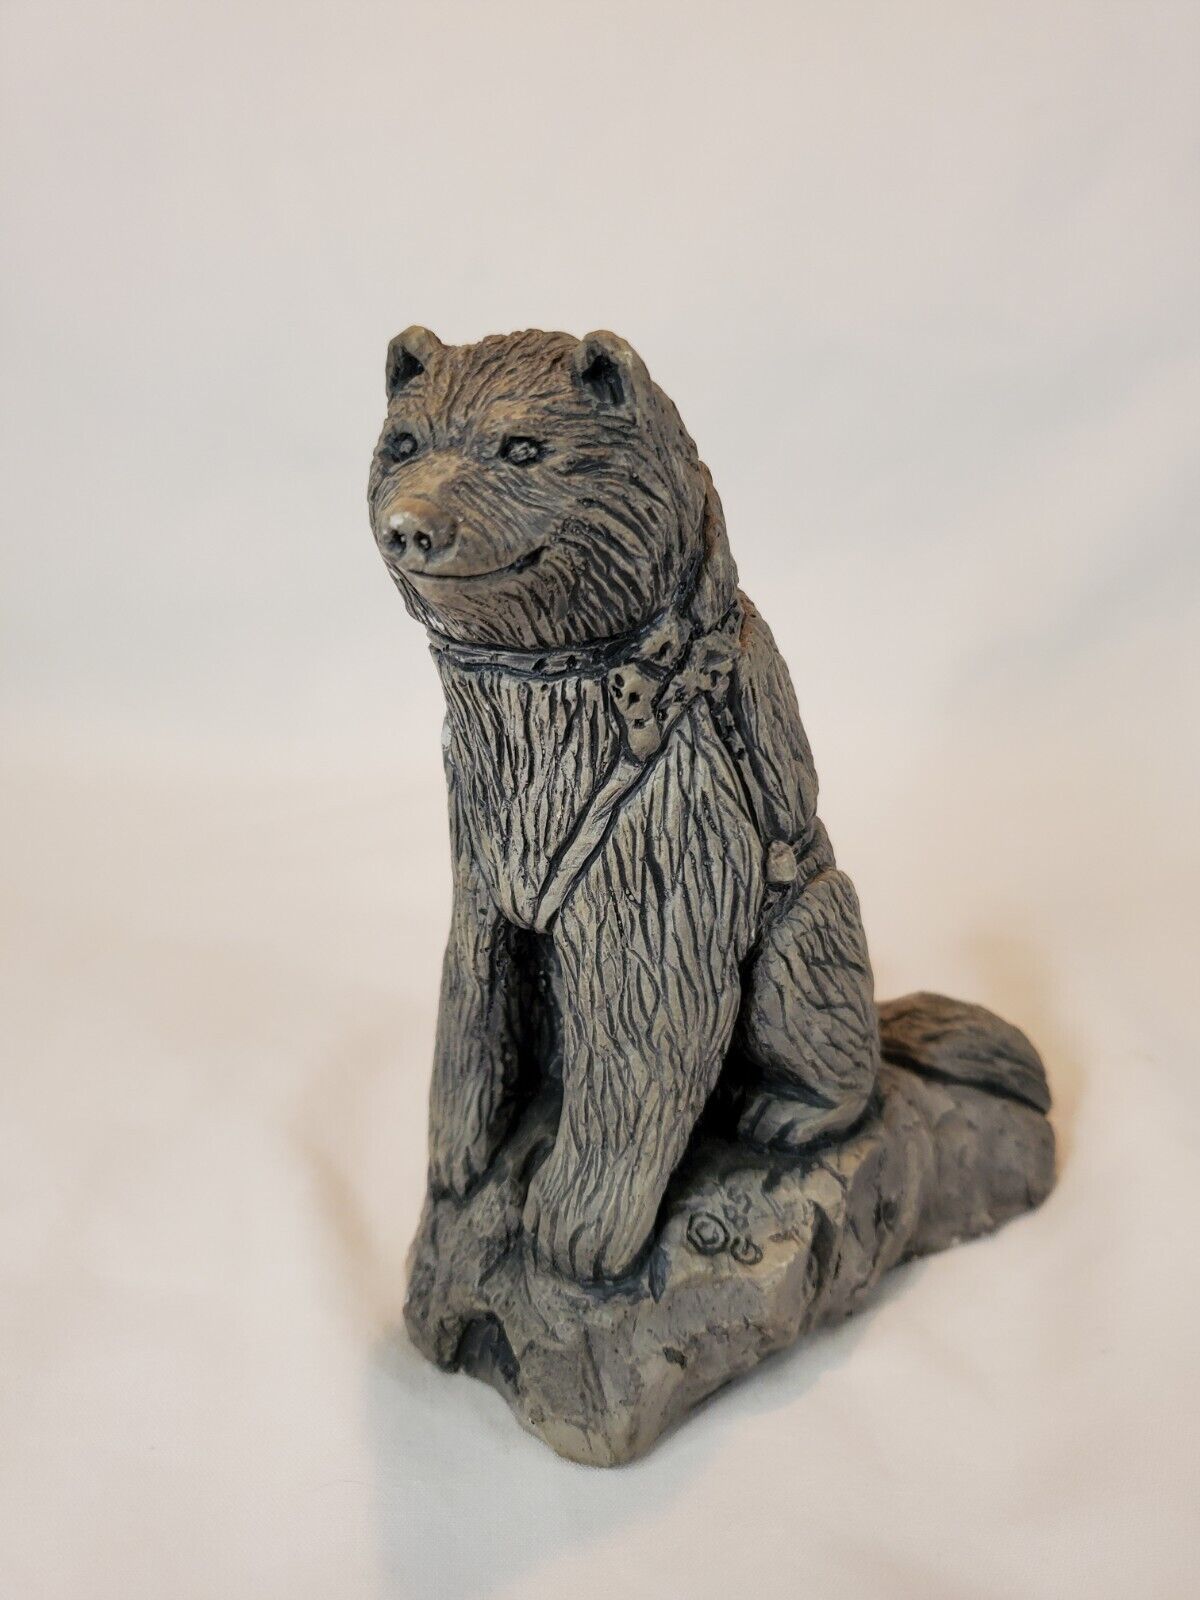 Bear Carving Hand Crafted from Glacial Silt G SFD CO Anchorage Alaska Vintage 